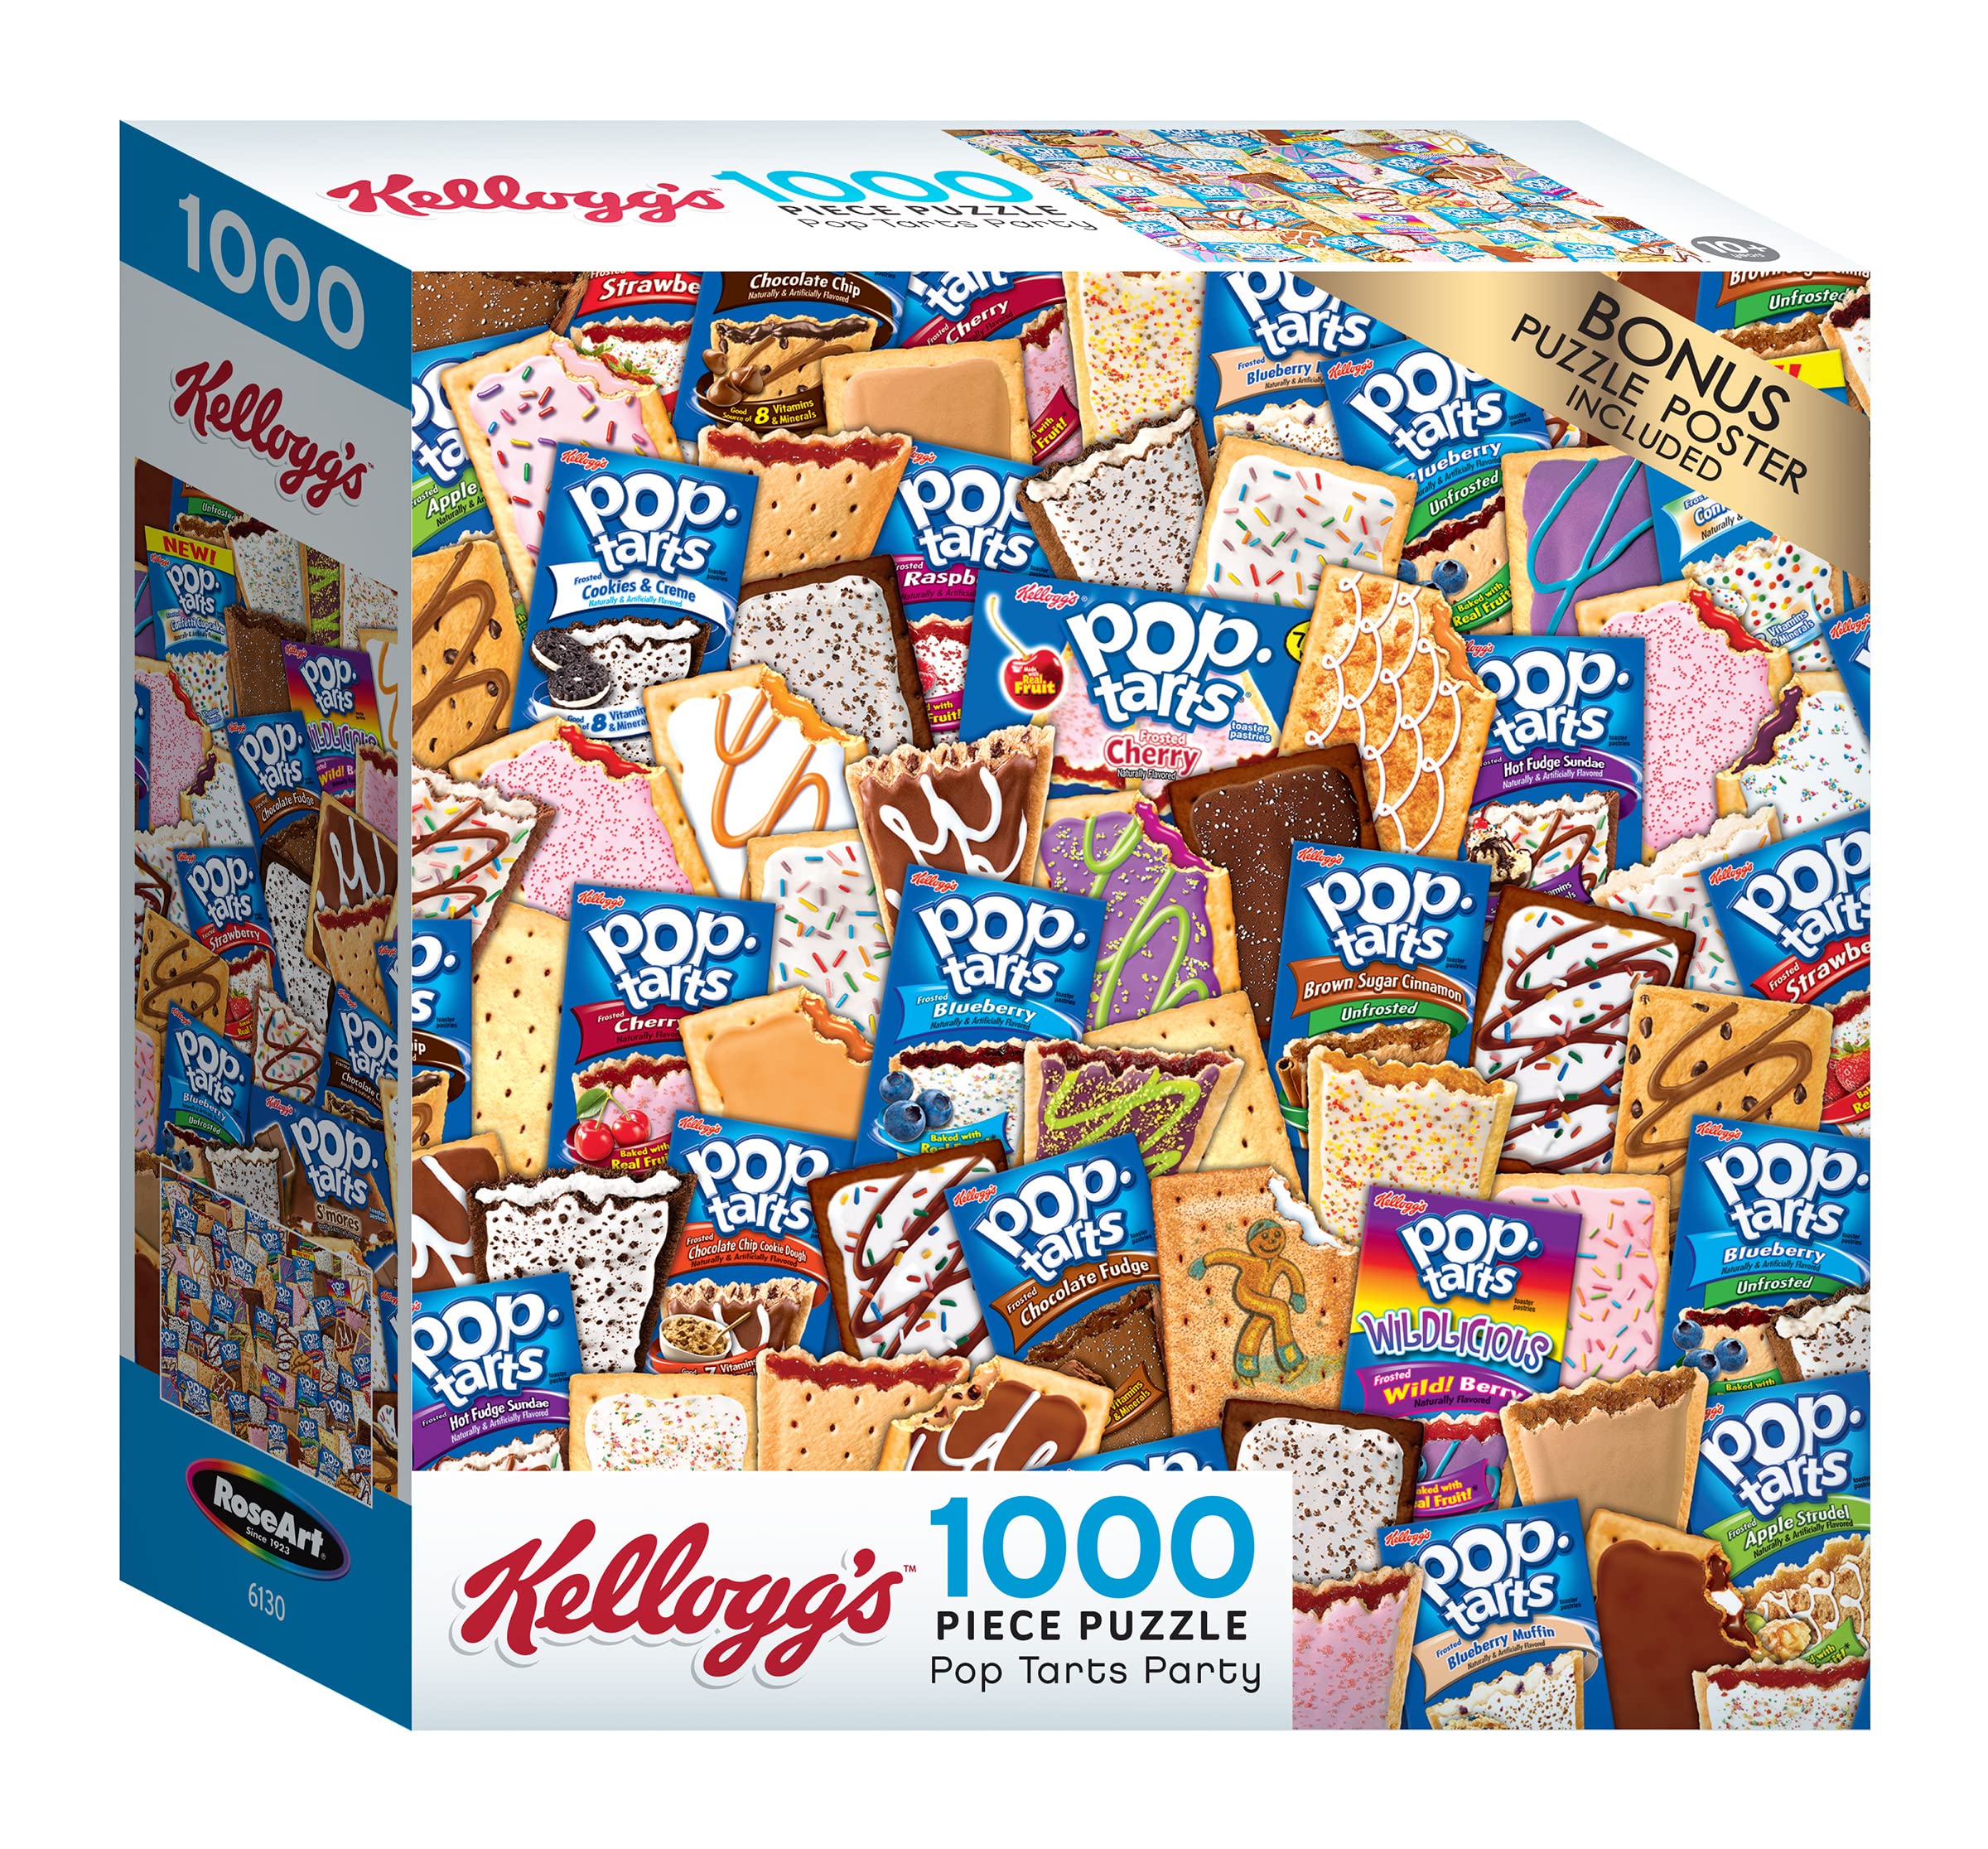 Lafayette Puzzle Factory Kellogg's 1000 PC Jigsaw Puzzles - Pop Tart Party, Multi-Colored